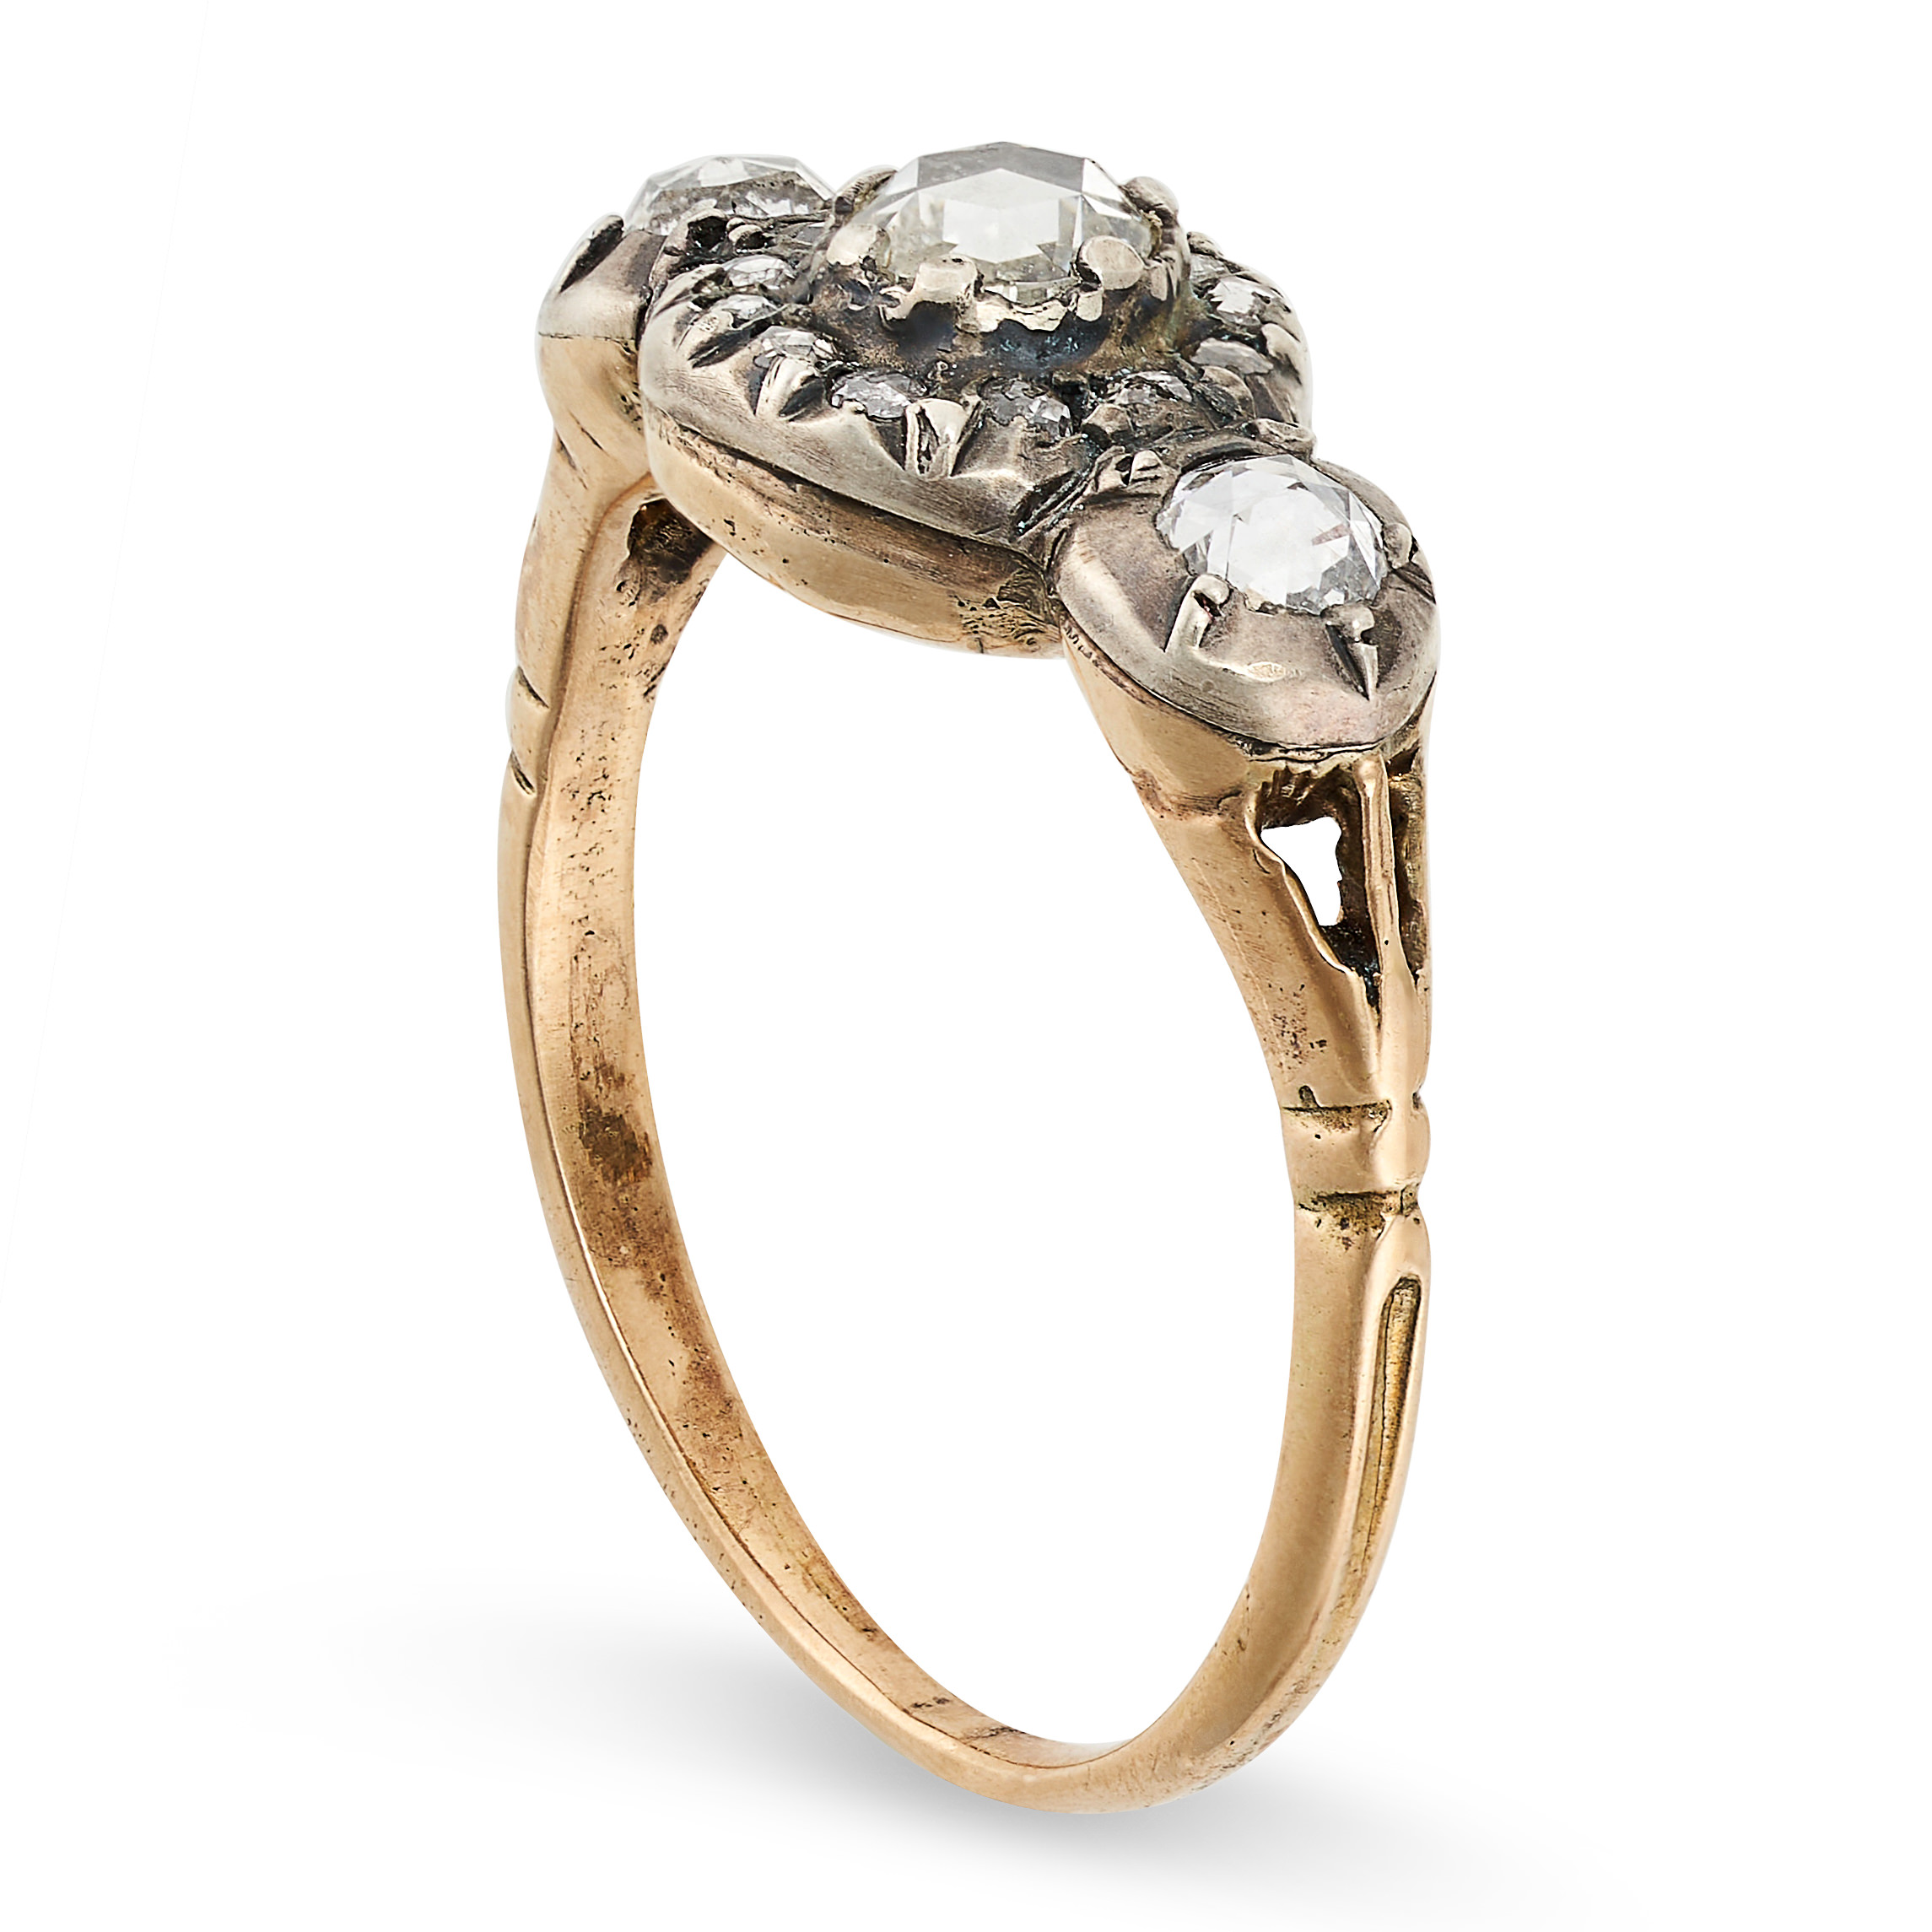 AN ANTIQUE DIAMOND RING set with three graduated rose cut diamonds, the central diamond surrounded - Image 2 of 2